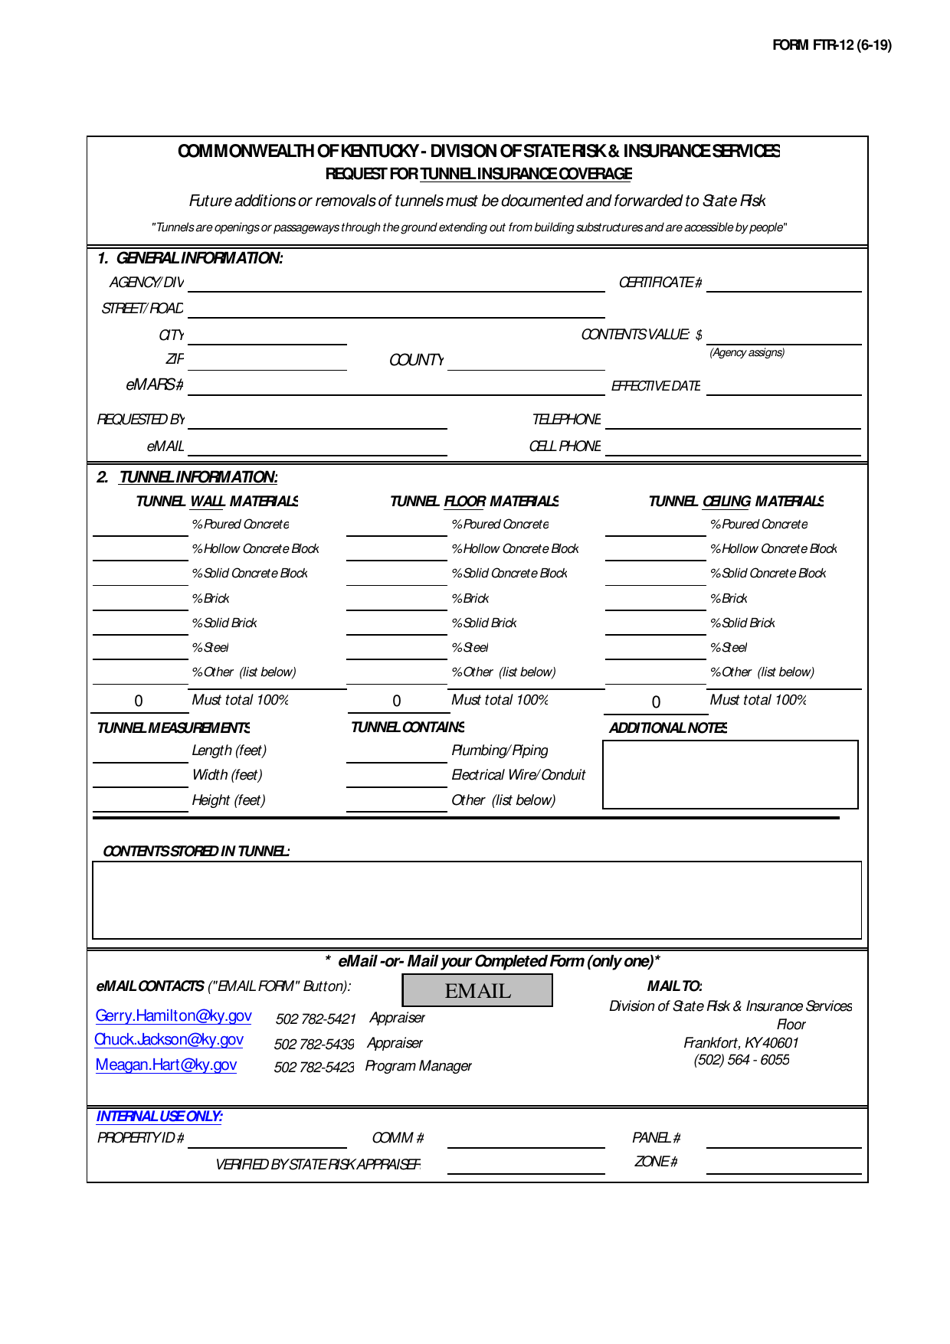 Form FTR-12 Request for Tunnel Insurance Coverage - Kentucky, Page 1